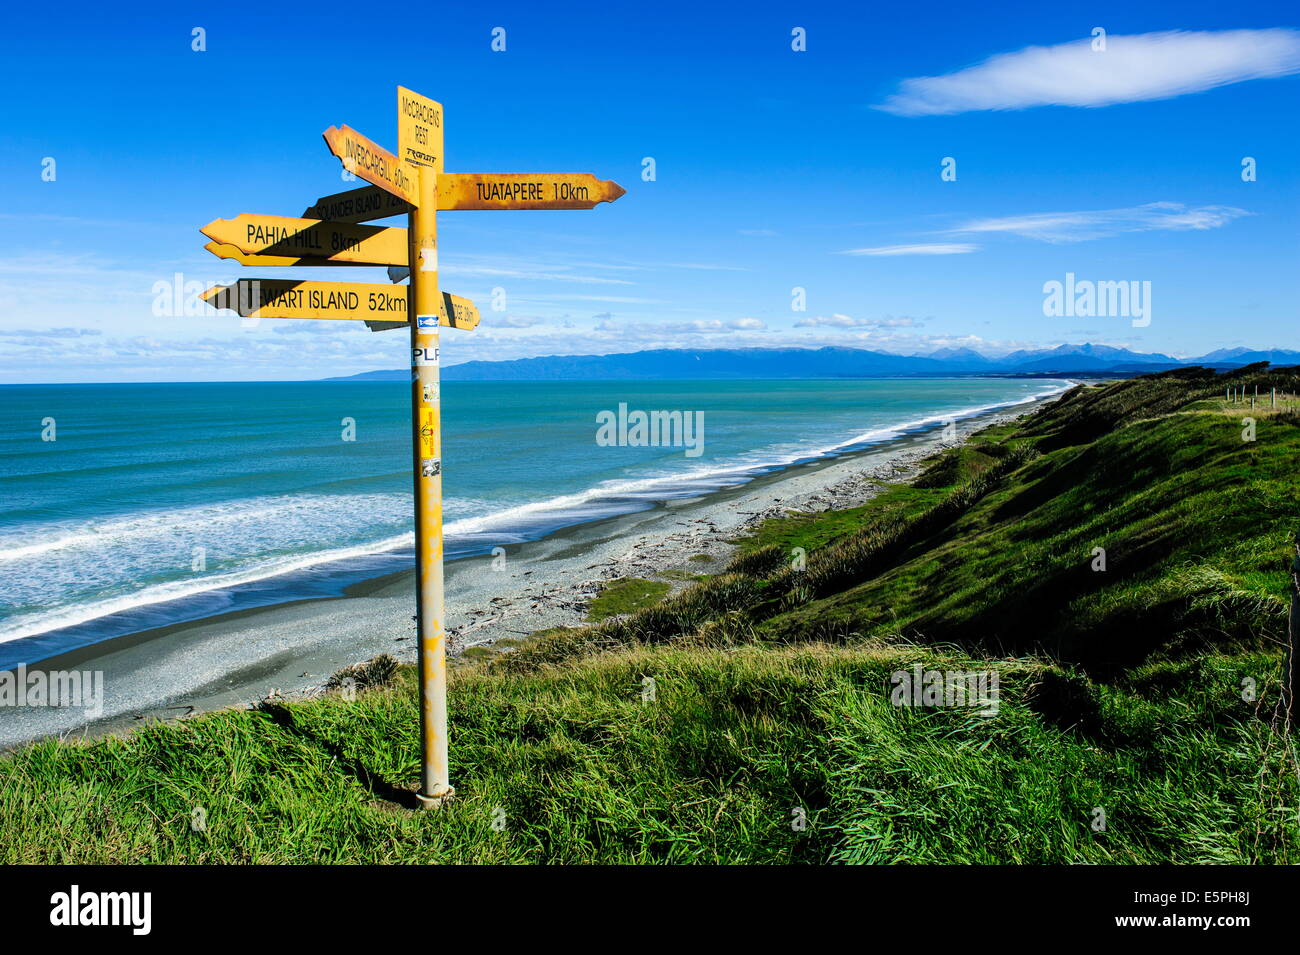 Signpost on Te Waewae Bay, along the road from Invercargill to Te Anau, South Island, New Zealand, Pacific Stock Photo